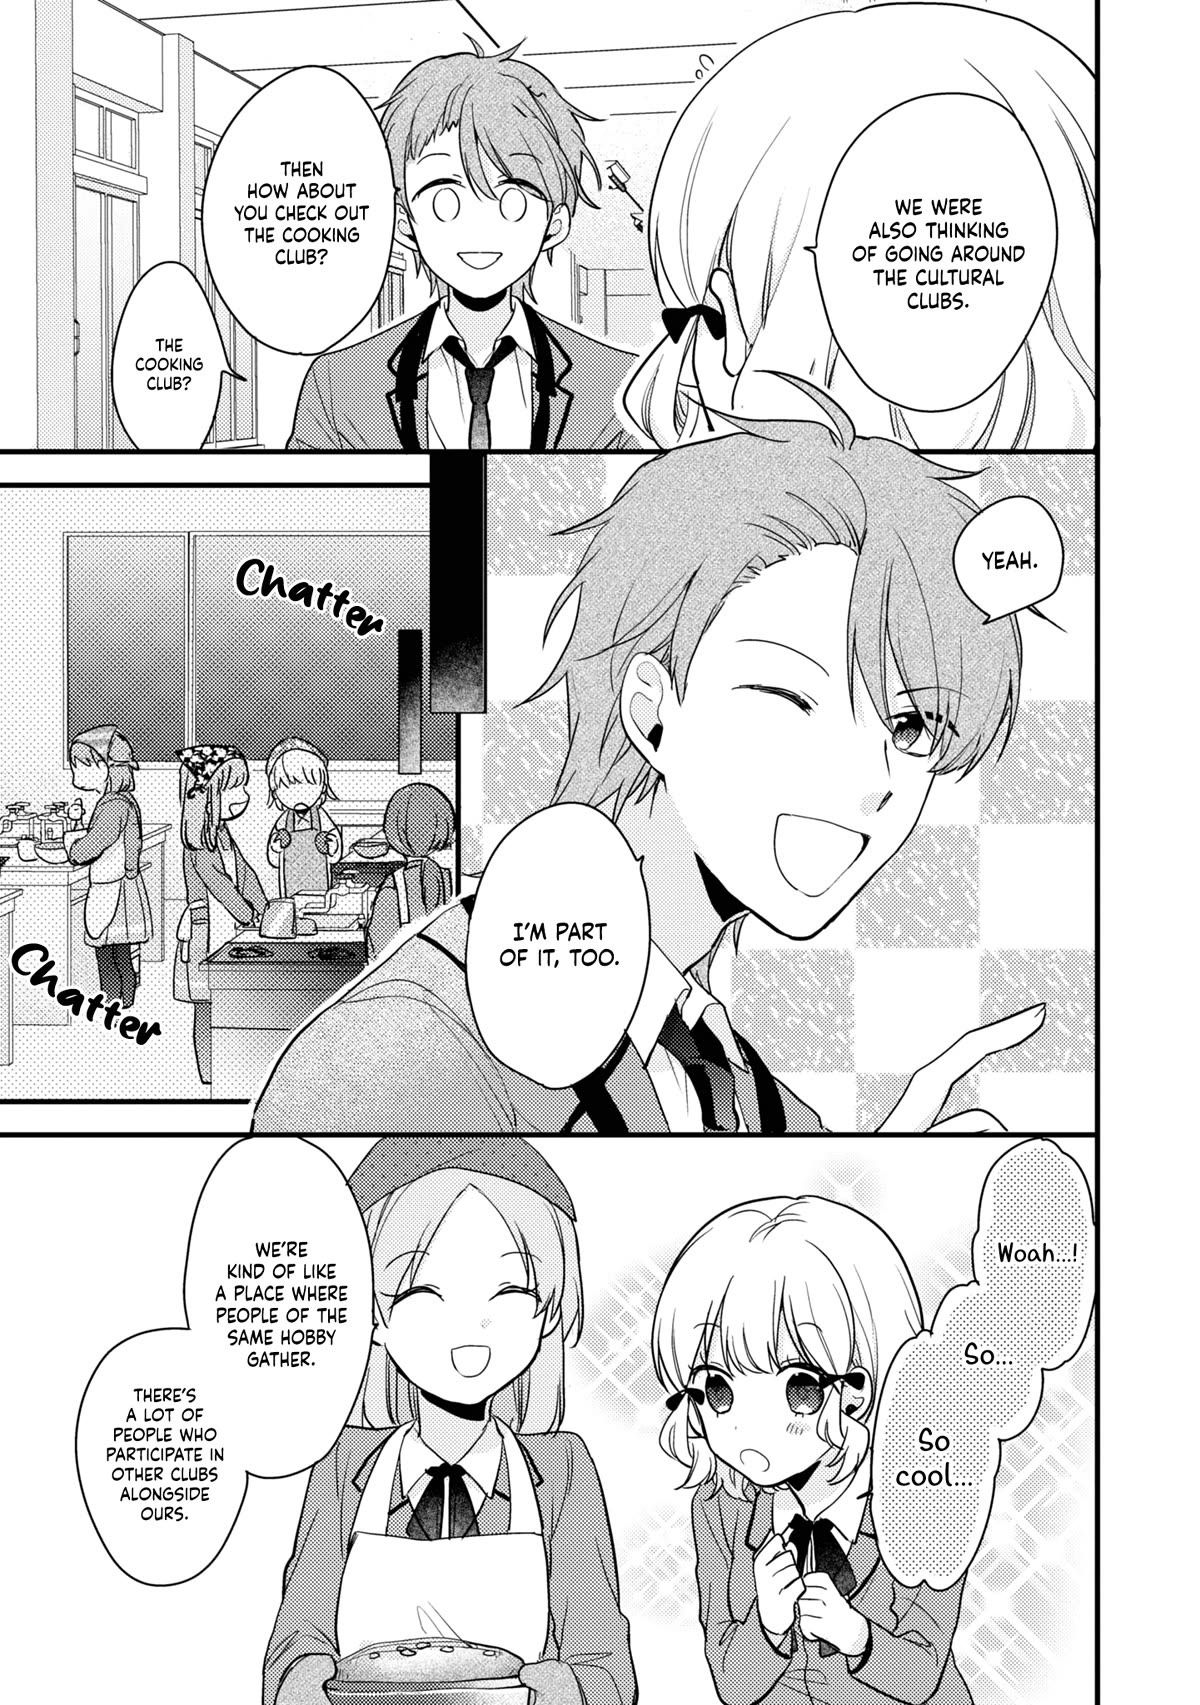 I Have A Second Chance At Life, So I’Ll Pamper My Yandere Boyfriend For A Happy Ending!! Chapter 4 #20